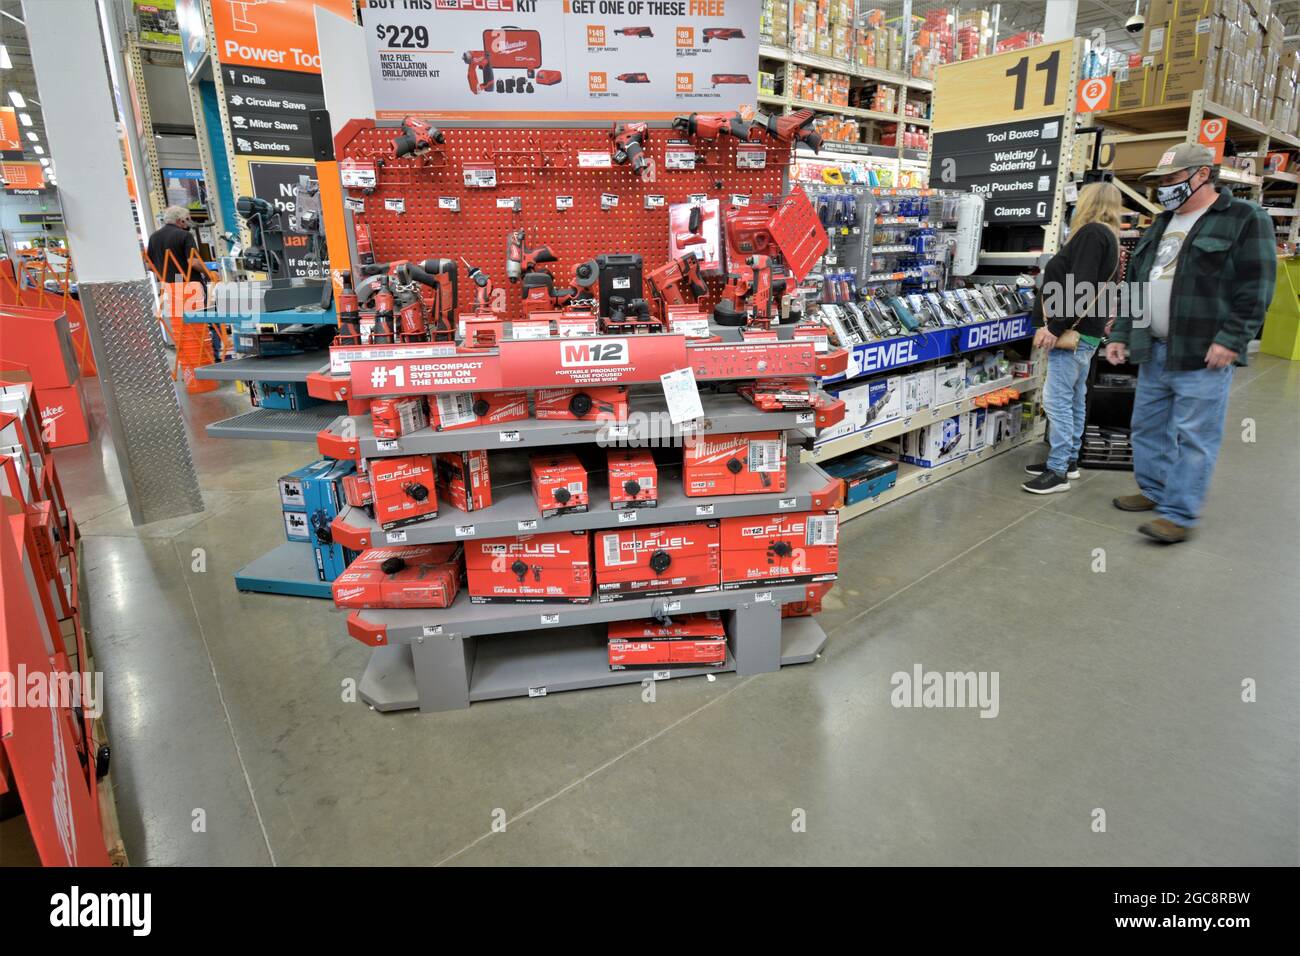 Big box hardware store and its items for sale to the DIY'ers who do it themselves around their homes and yards rather than hire professionals Stock Photo